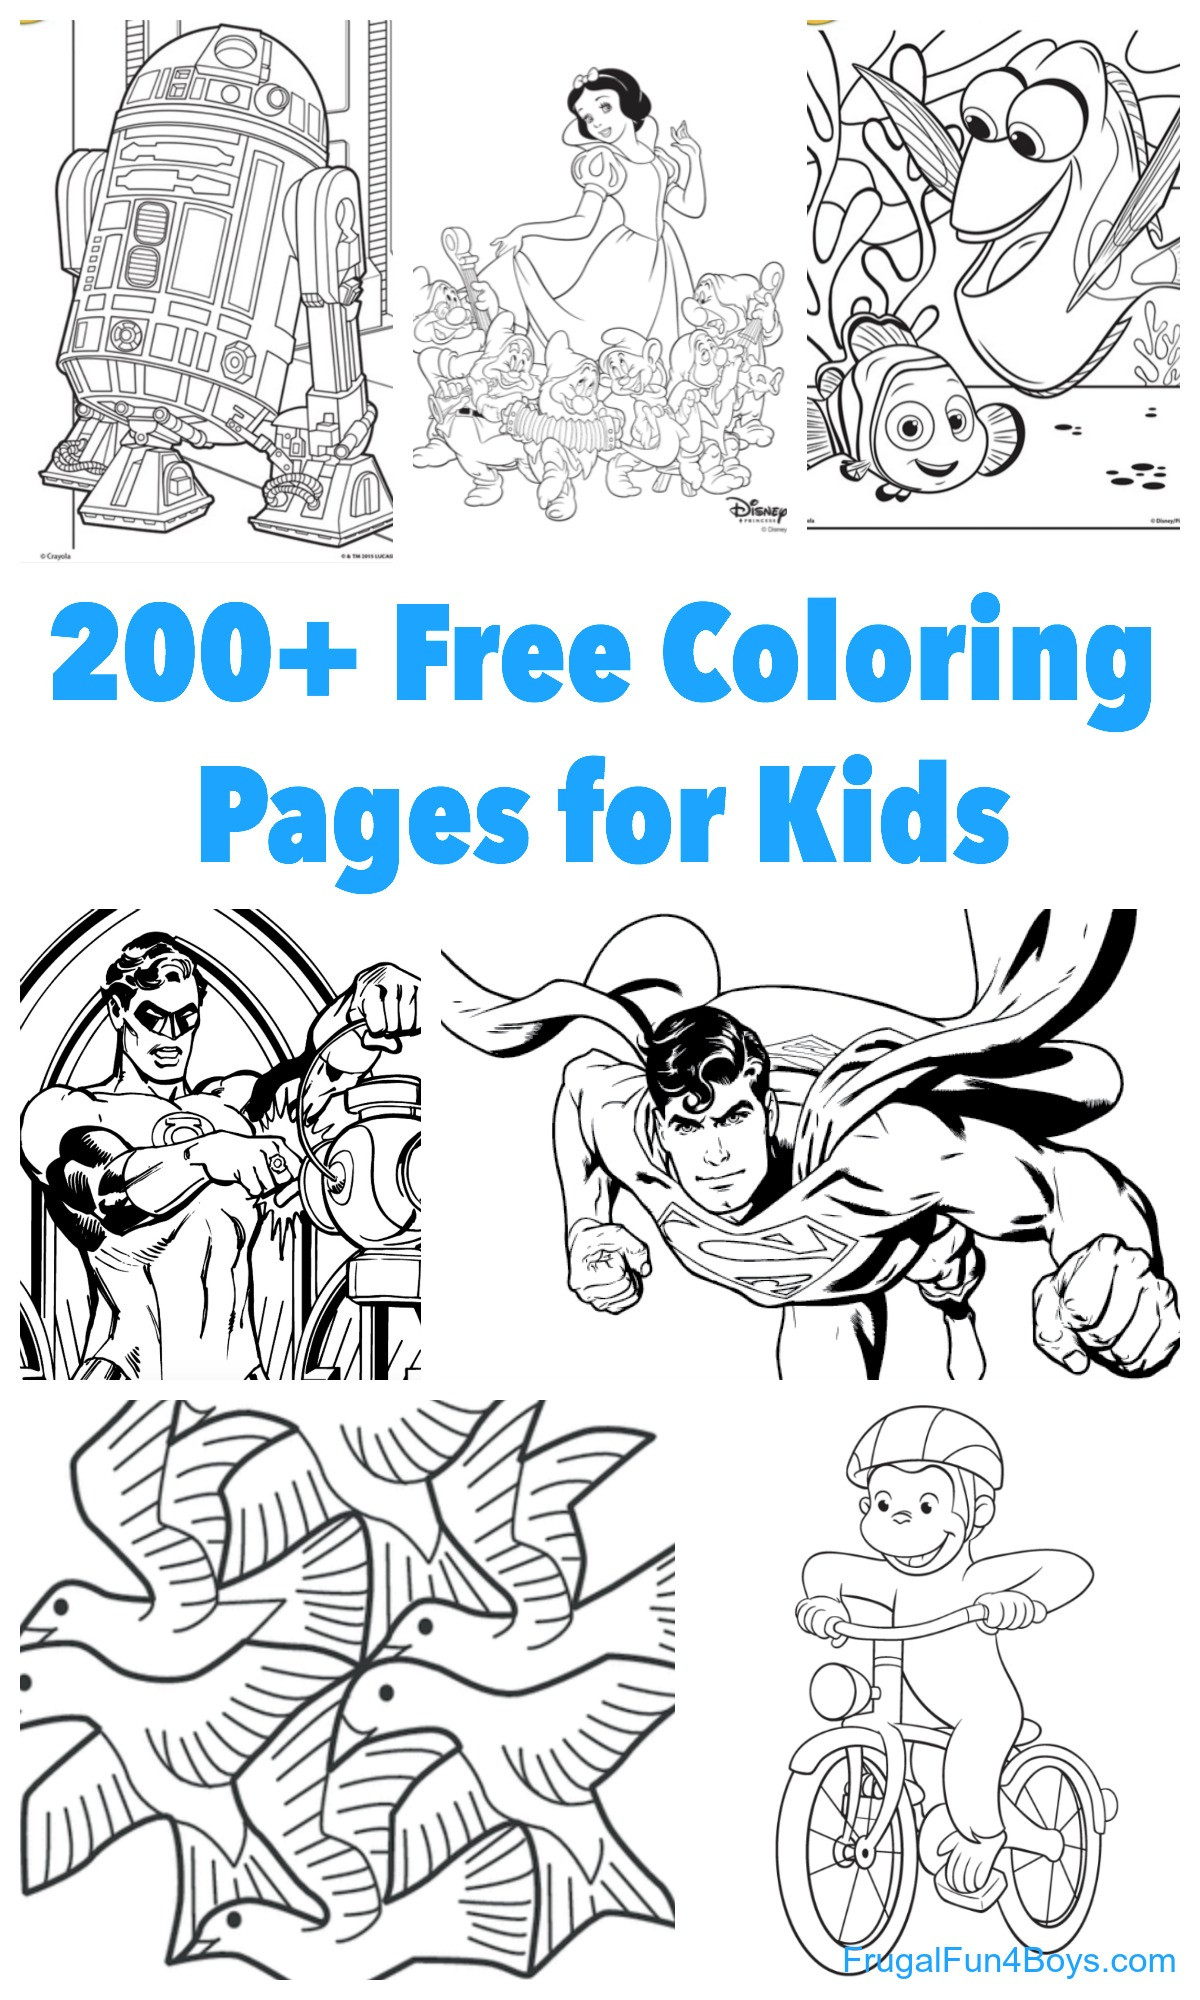 Coloring Pages For Boys To Print
 200 Printable Coloring Pages for Kids Frugal Fun For